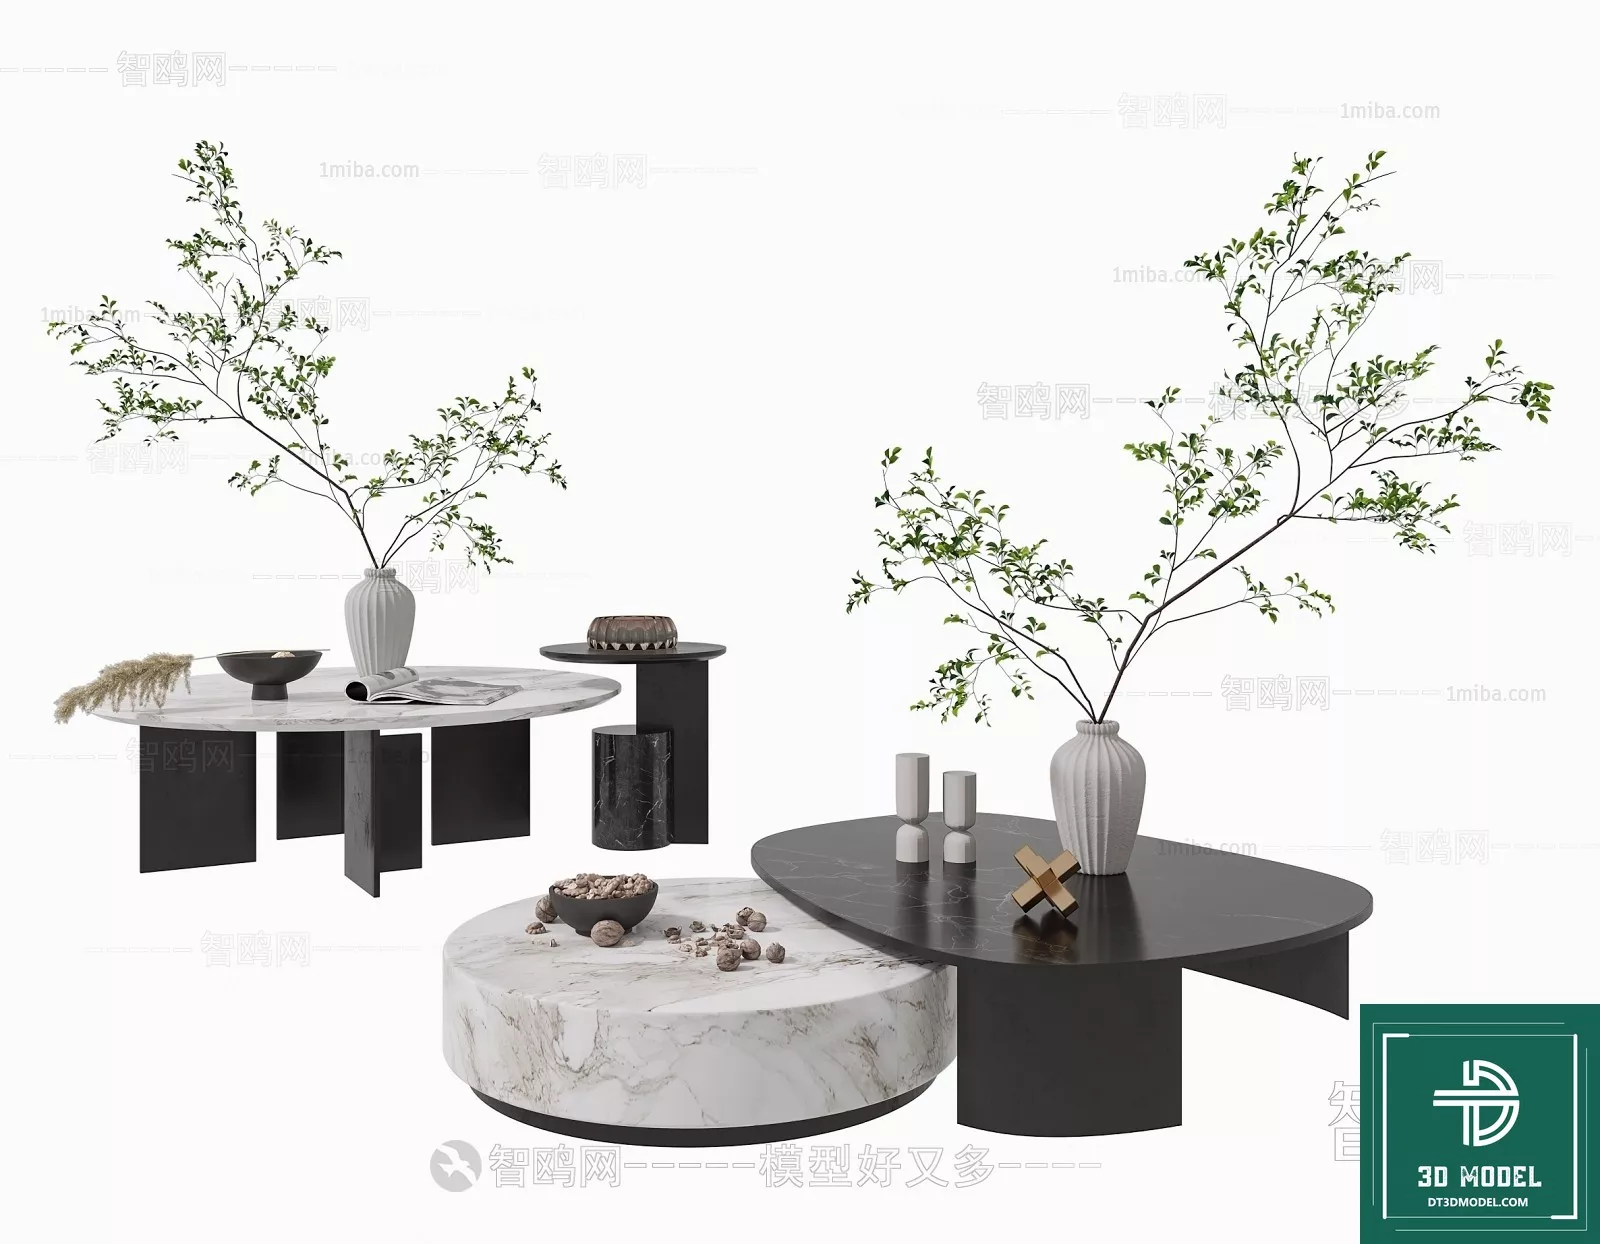 MODERN TEA TABLE - SKETCHUP 3D MODEL - VRAY OR ENSCAPE - ID14985